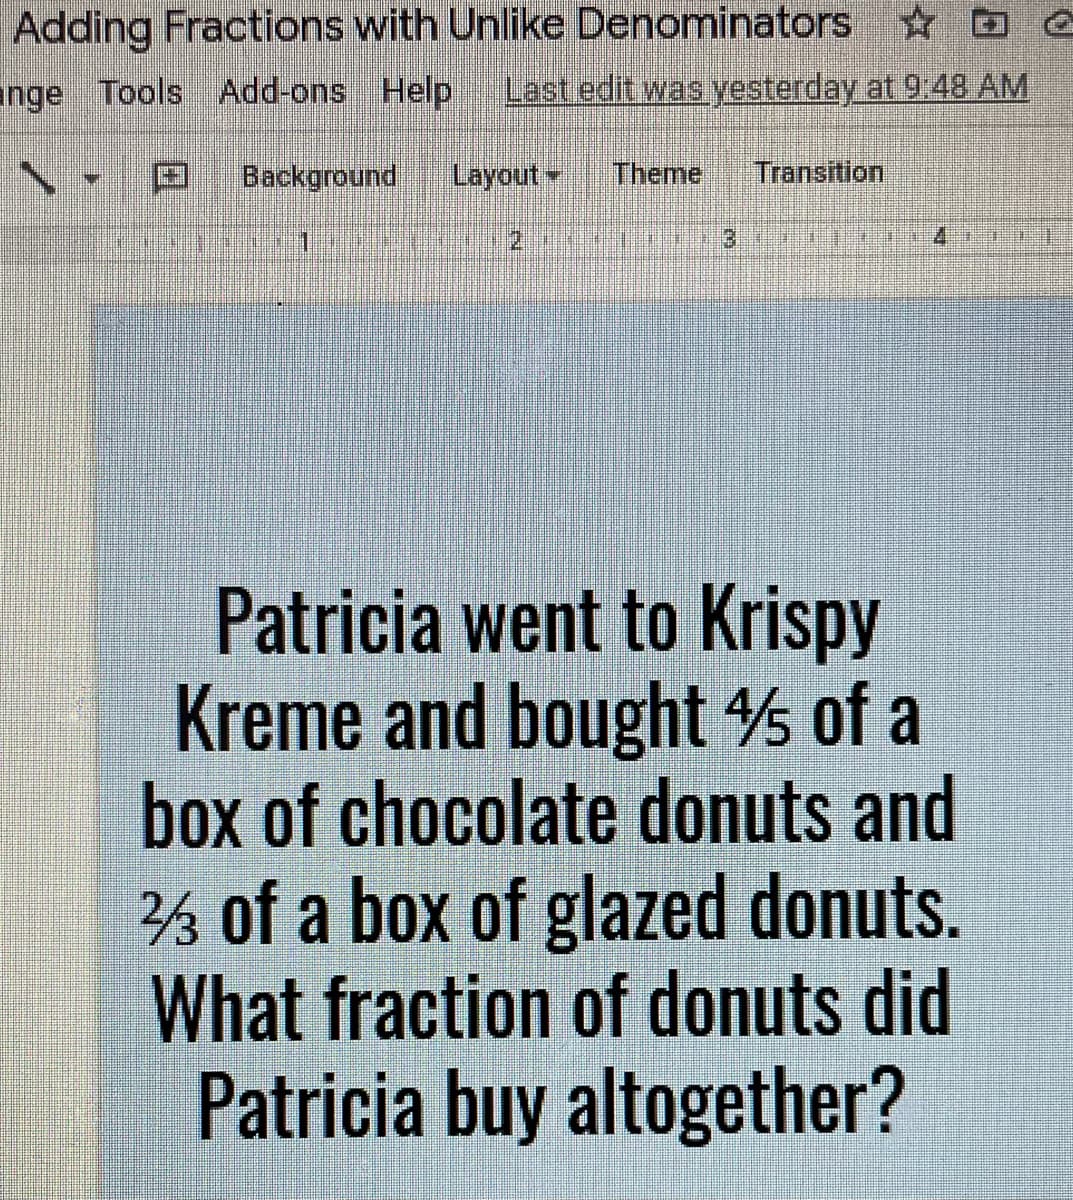 Adding Fractions with Unlike Denominators D O
ange Tools Add-ons Help
Last edit was yesterday at 9.48 AM
国
Background
Layout.
Theme
Transition
Patricia went to Krispy
Kreme and bought of a
box of chocolate donuts and
% of a box of glazed donuts.
What fraction of donuts did
Patricia buy altogether?
